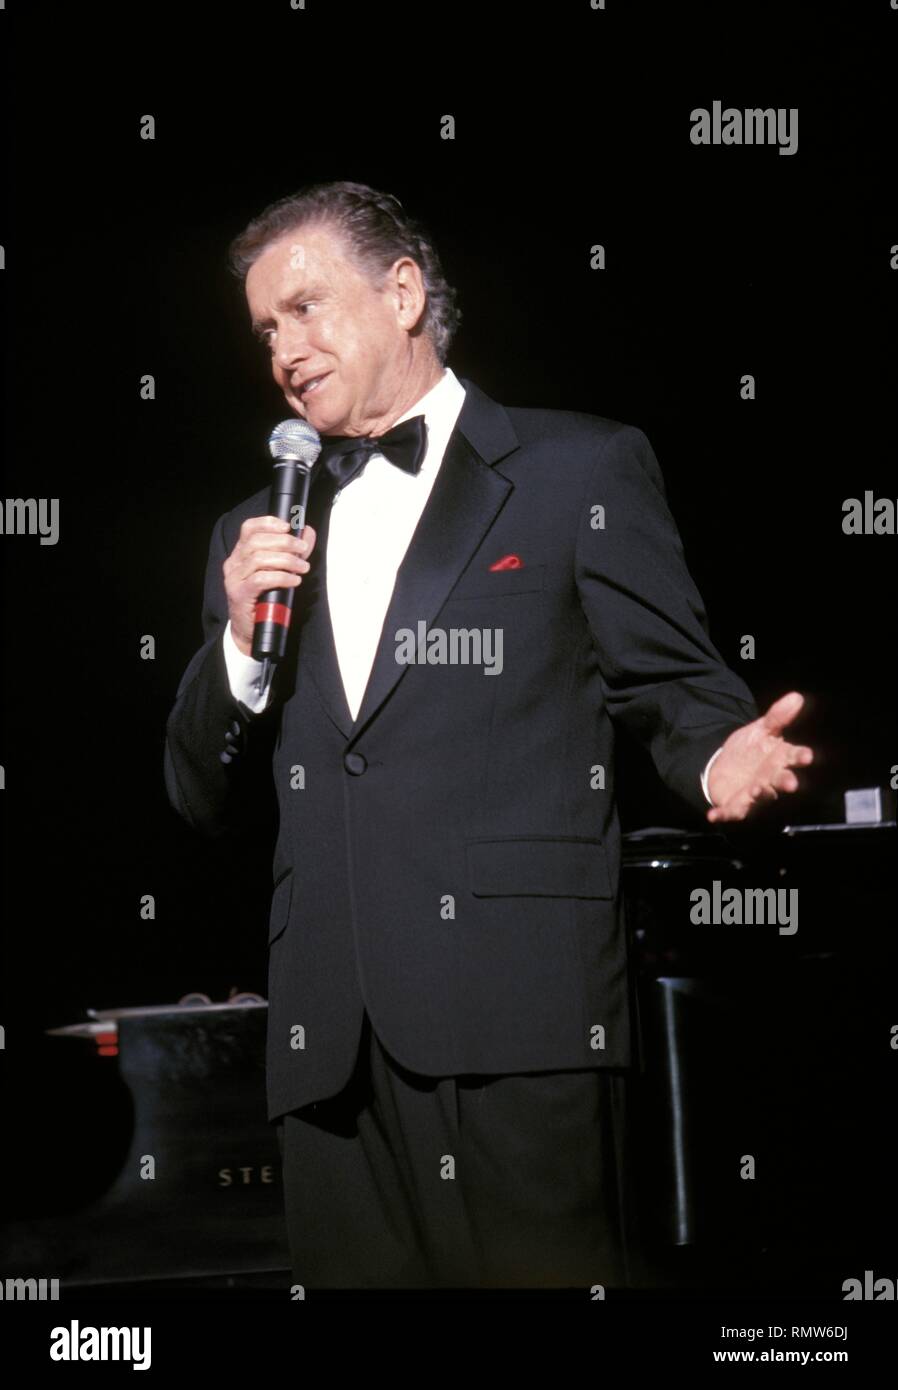 Television personality Regis Philbin is shown performing on stage ...